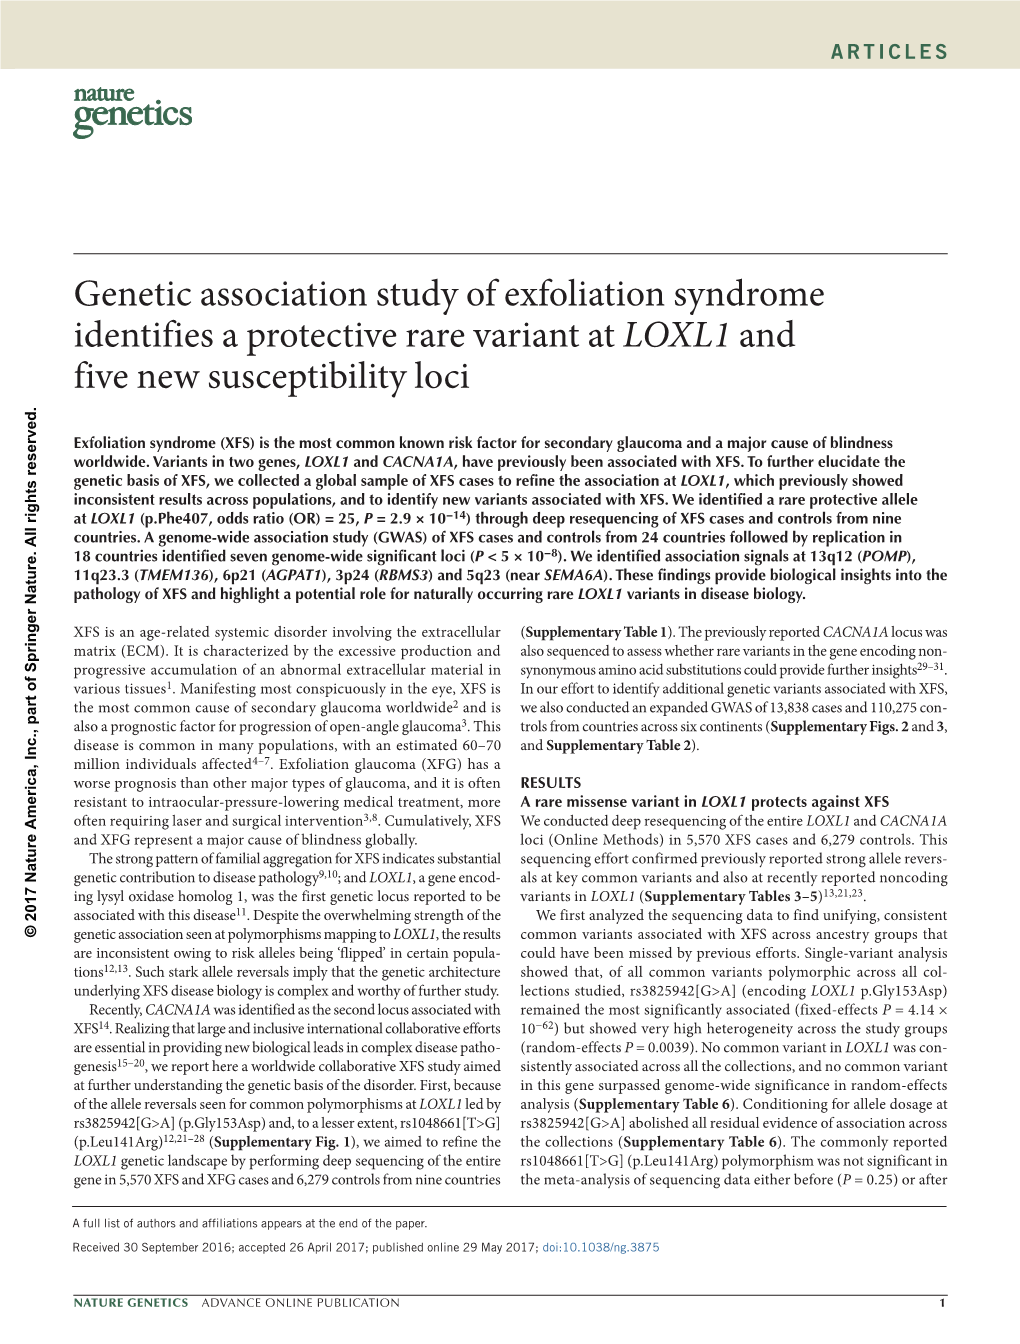 Genetic Association Study of Exfoliation Syndrome Identifies A